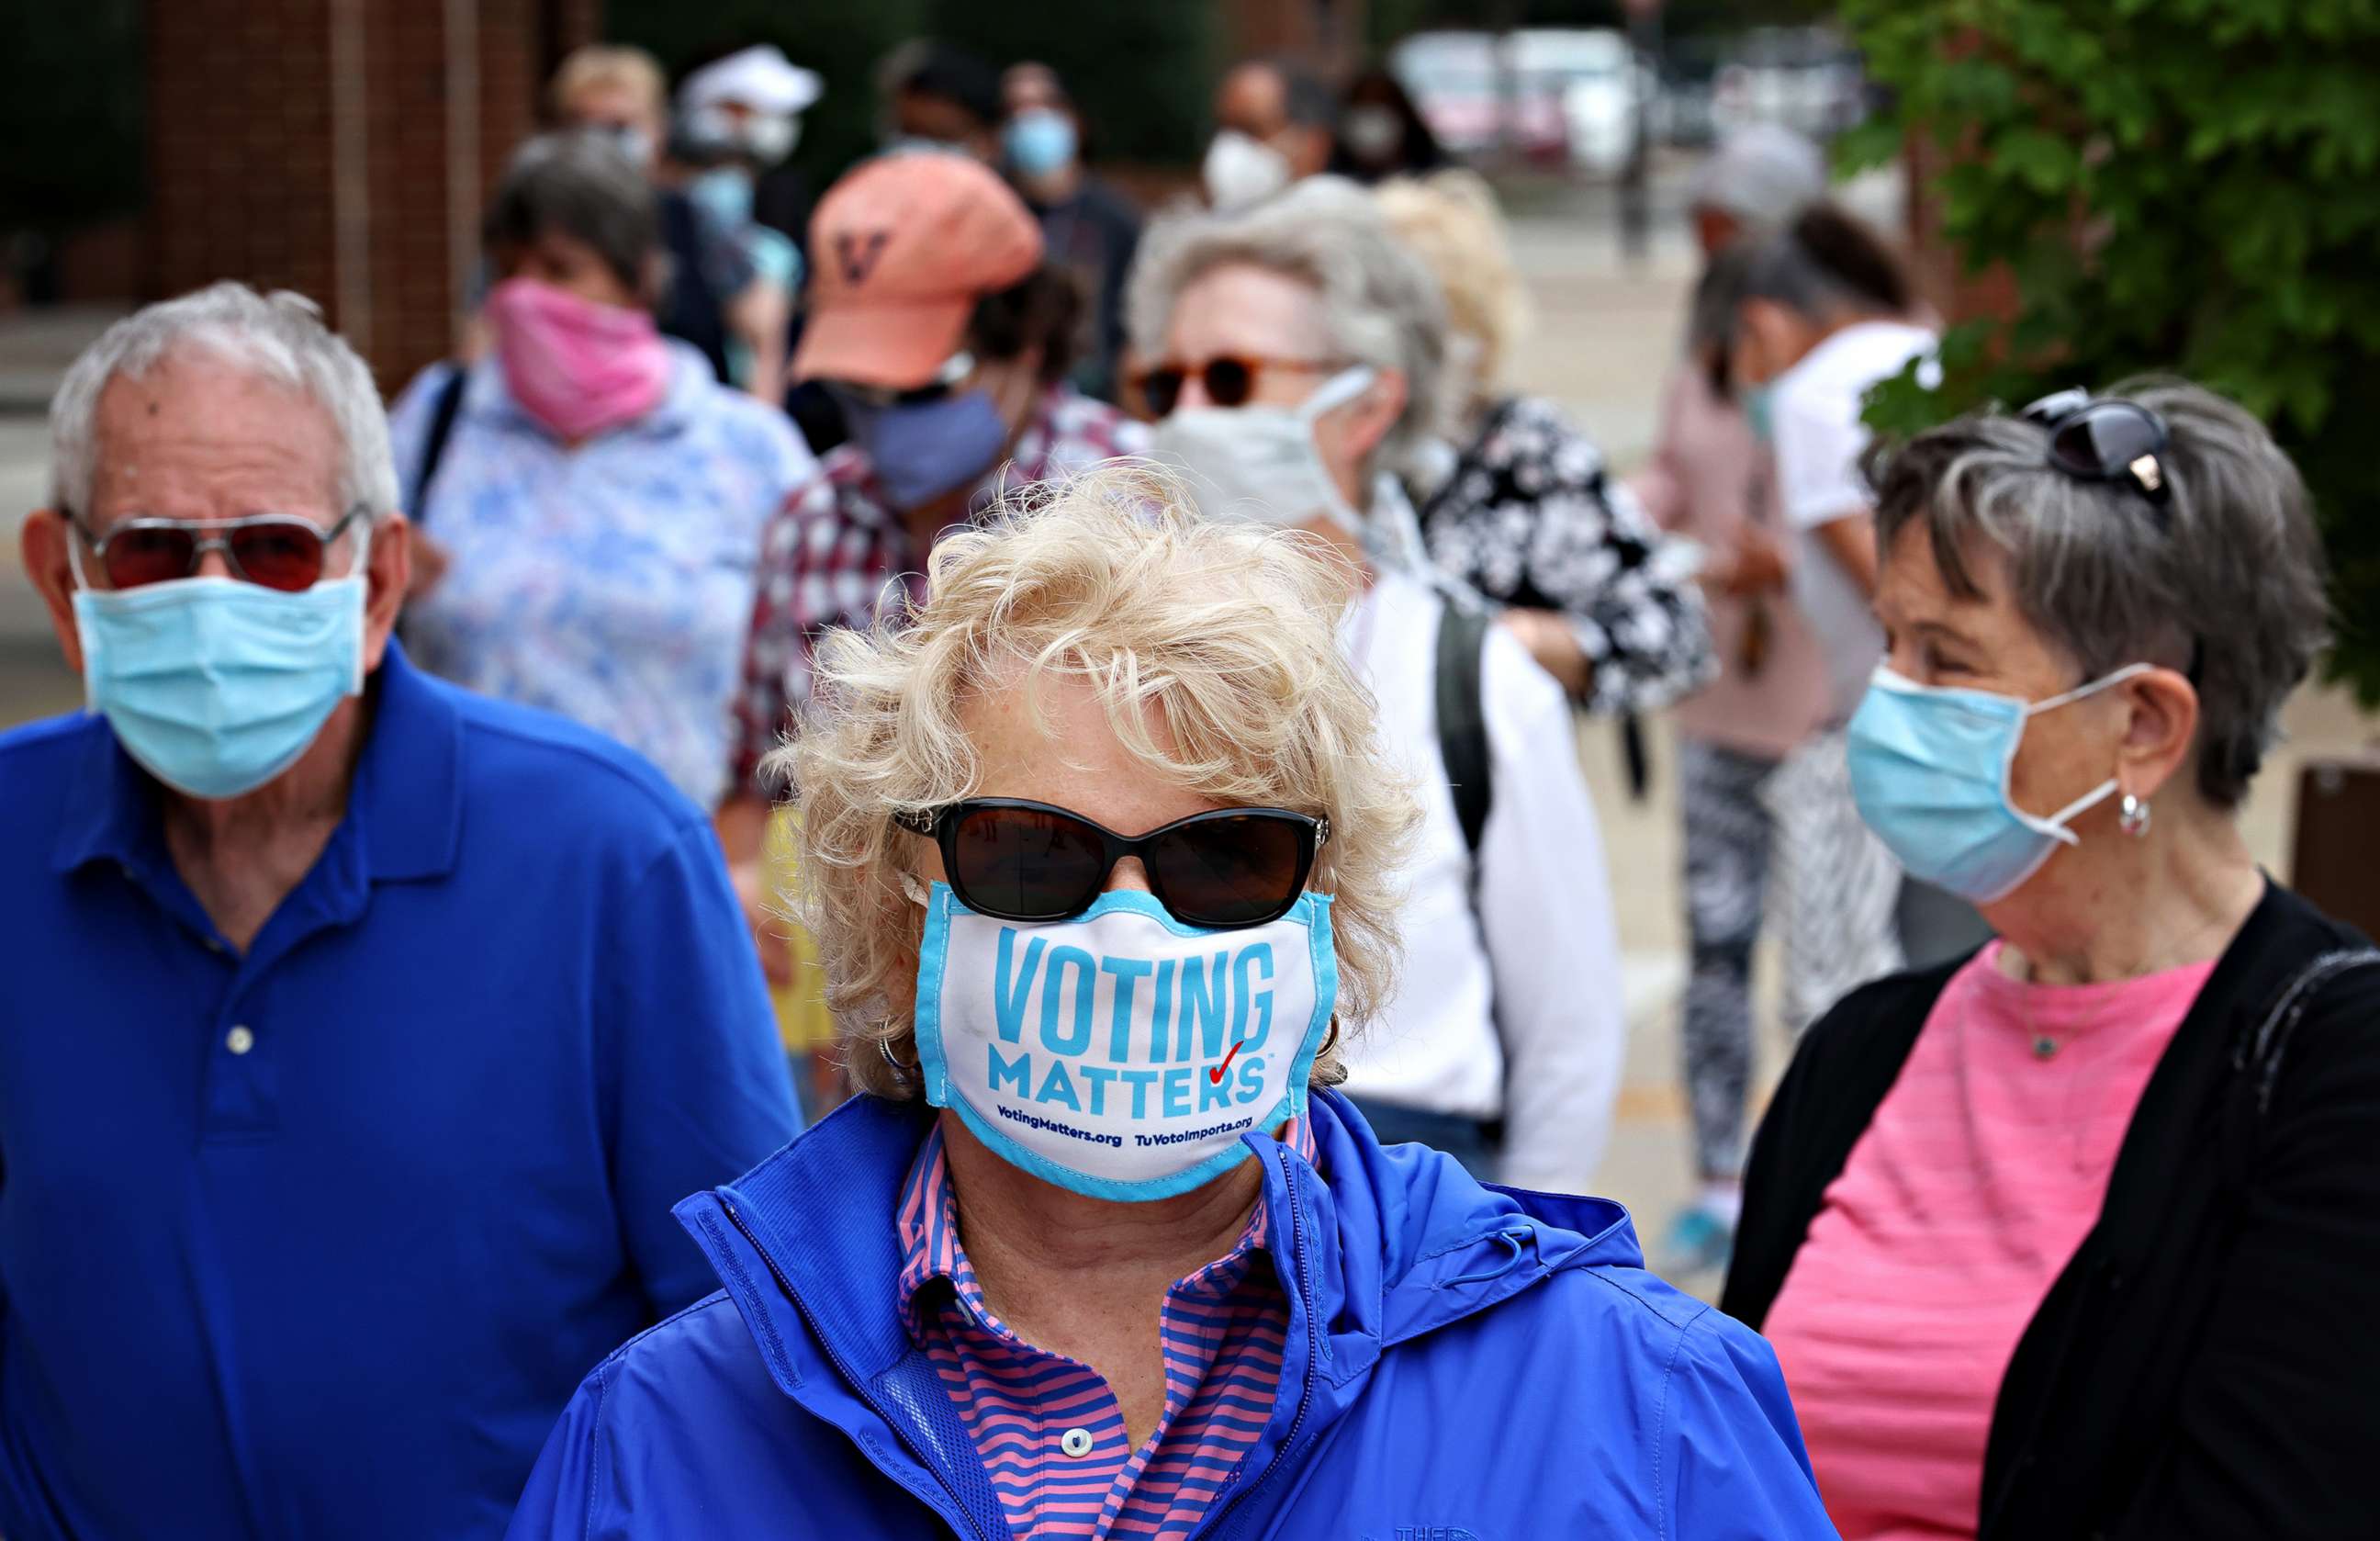 PHOTO: Voters in Virginia's 7th district wait in line to vote at the Henrico County Registrar's office on the first day of early voting, Sept. 18, 2020, in Henrico, Va.